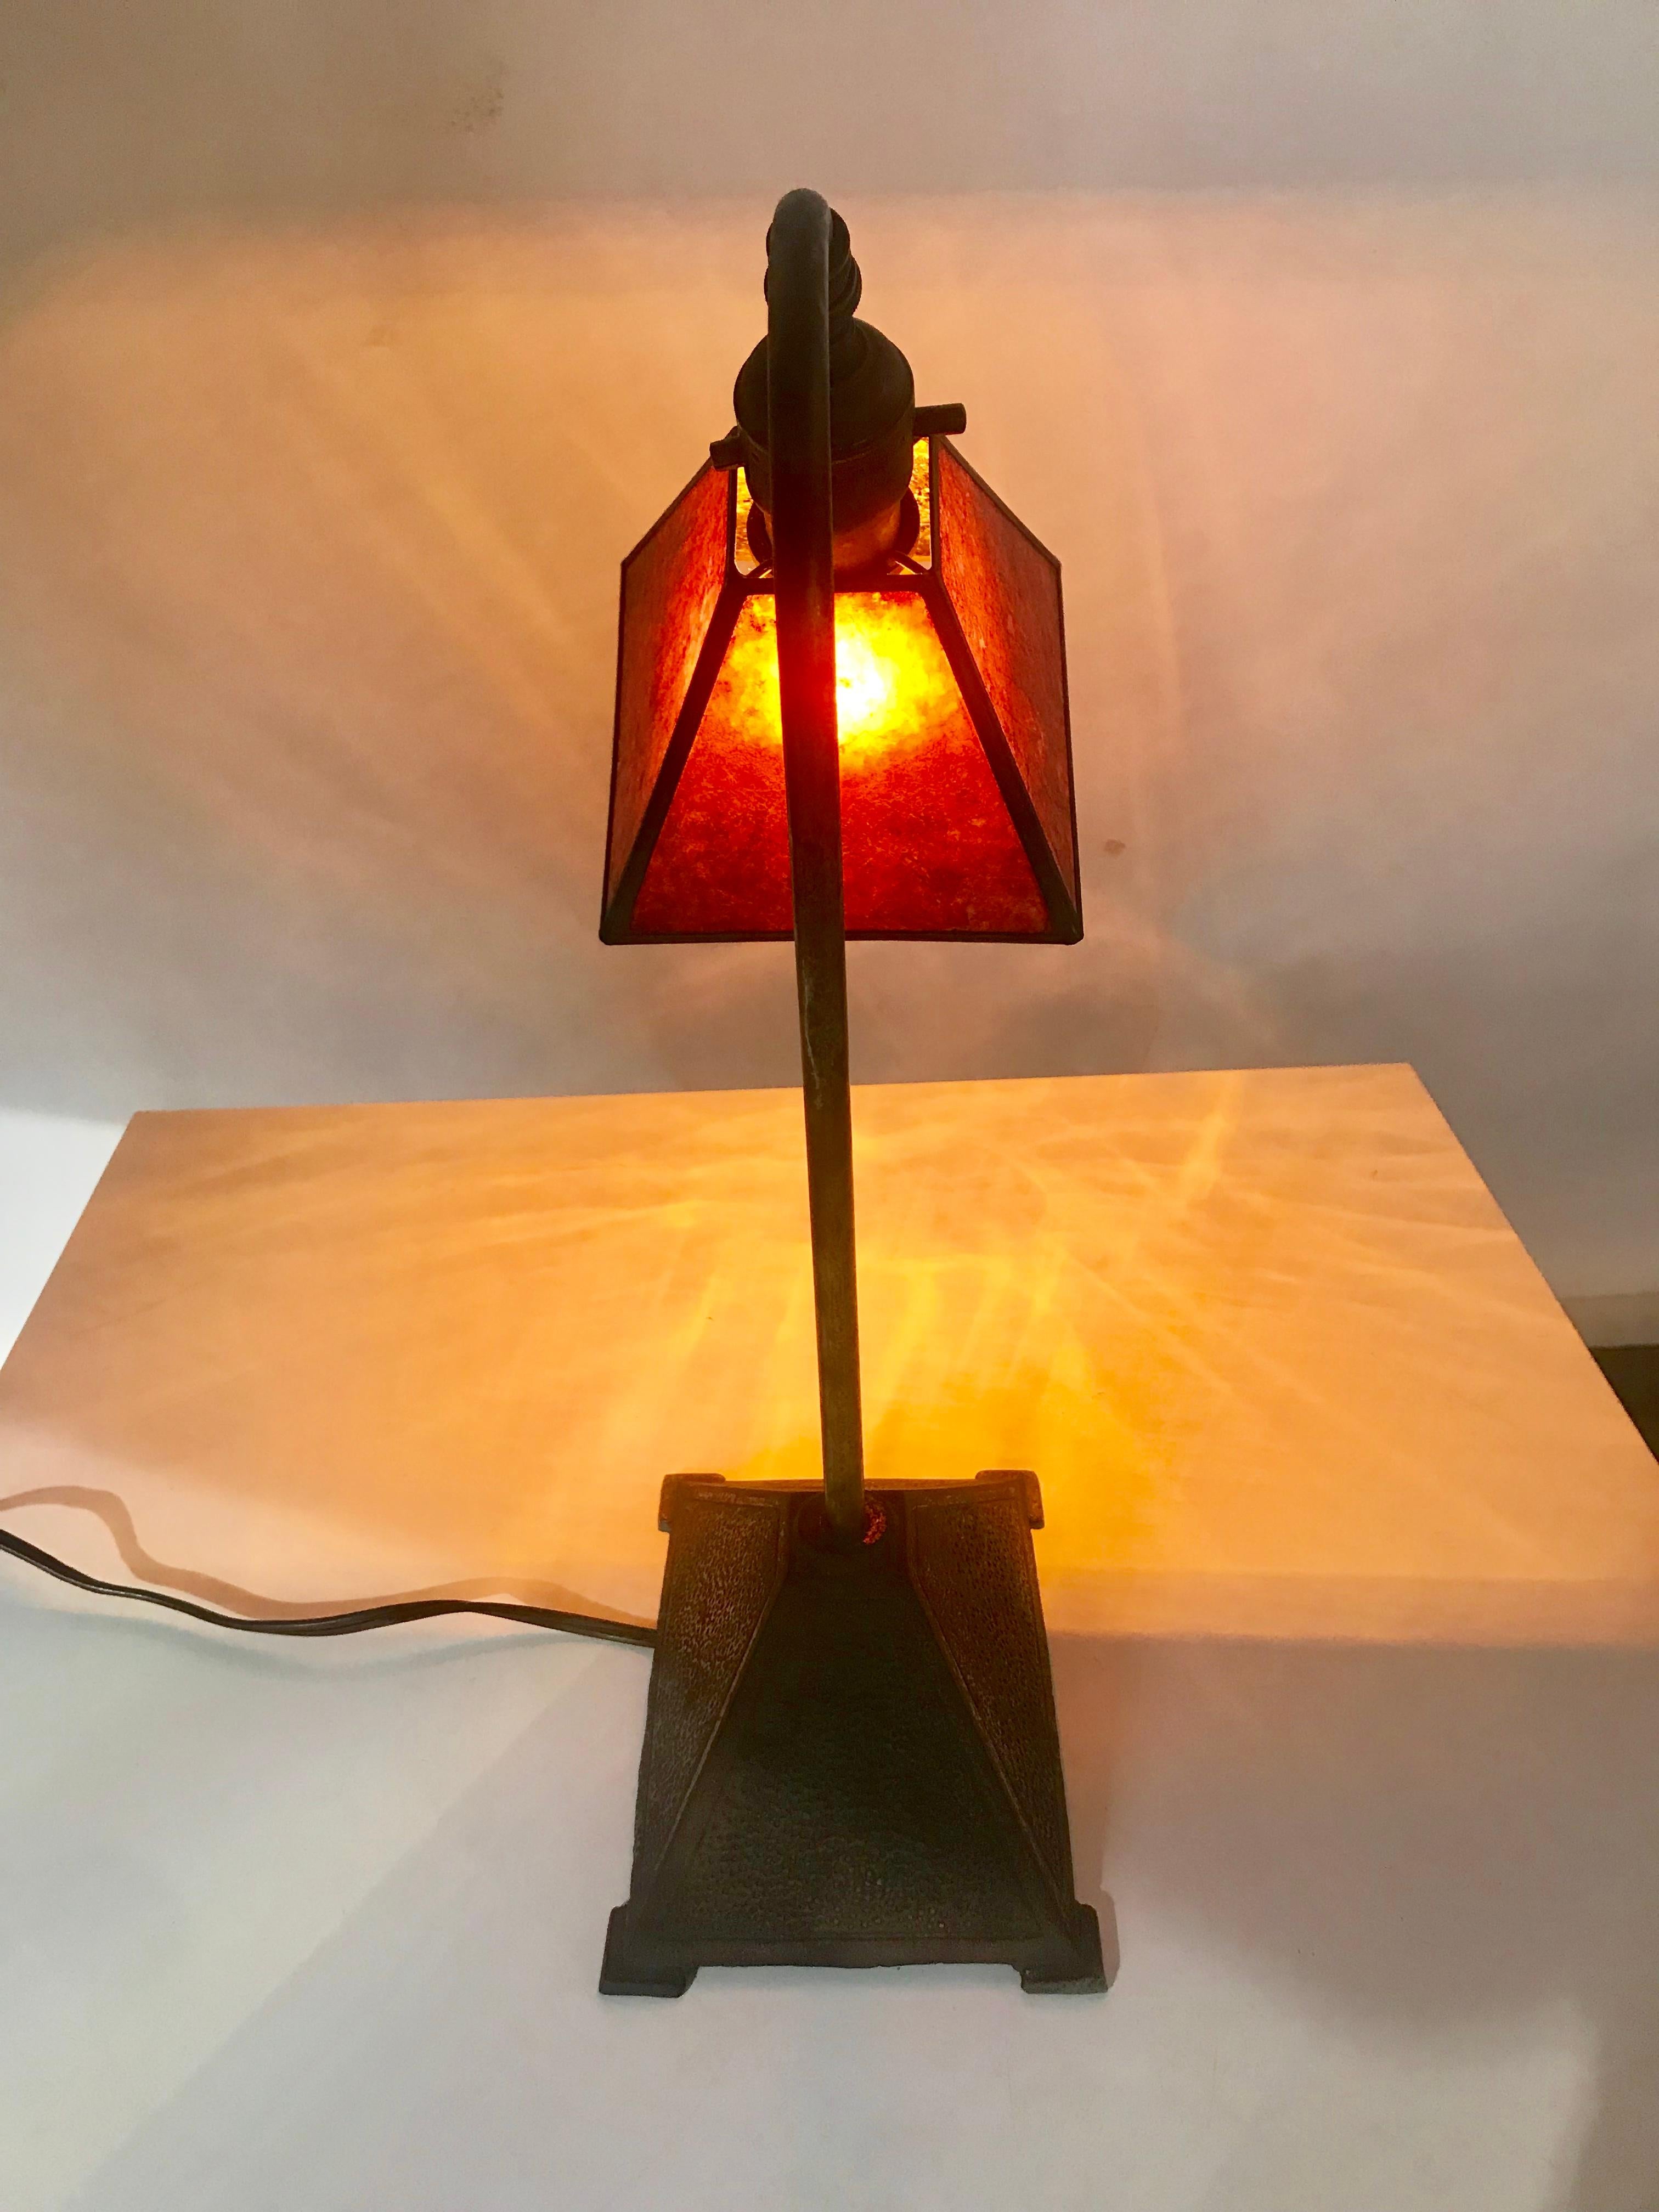 Classic Arts & Crafts metal and mica shade desk lamp by N Y W L F Co. Chicago, metal base, stem and frame retains original bronze patina, beautiful 4-sided lamp shade with original mica panels,.